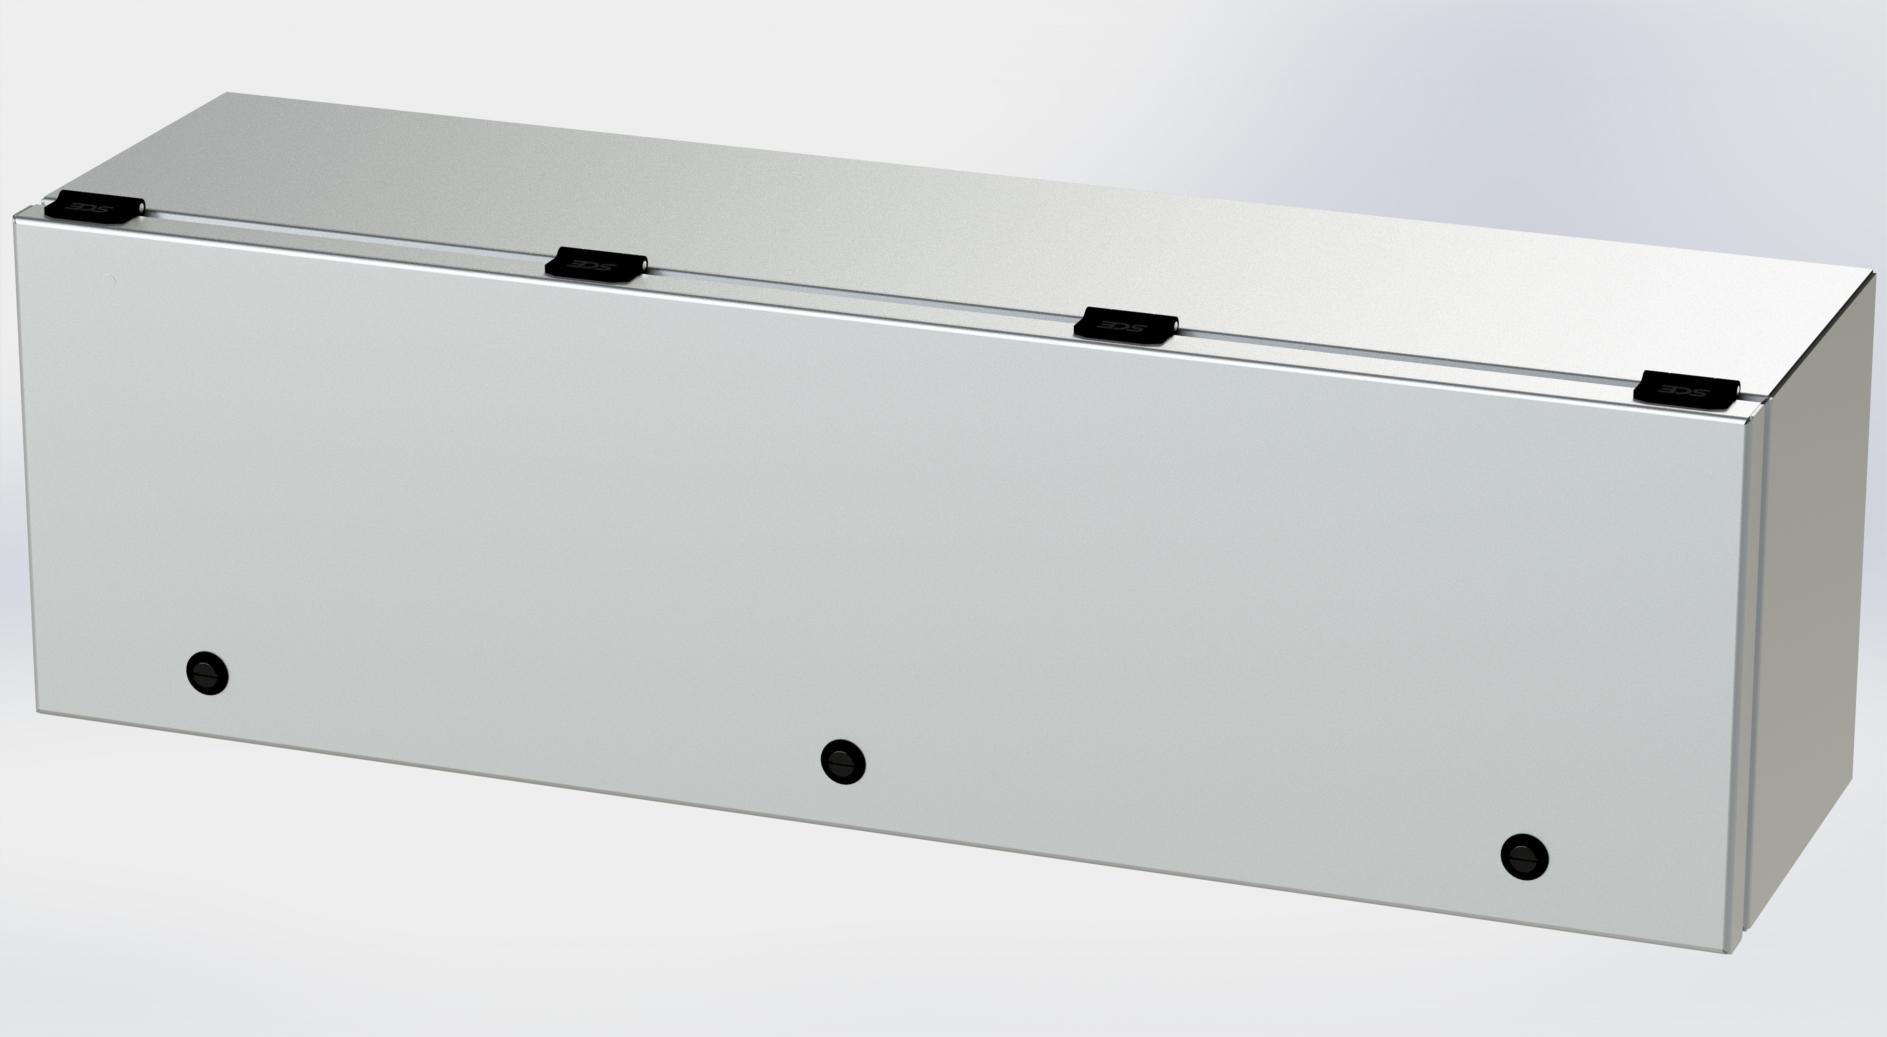 Saginaw Control SCE-L9308ELJSS S.S. ELJ Trough Enclosure, Height:9.00", Width:30.00", Depth:8.00", #4 brushed finish on all exterior surfaces. Optional sub-panels are powder coated white.